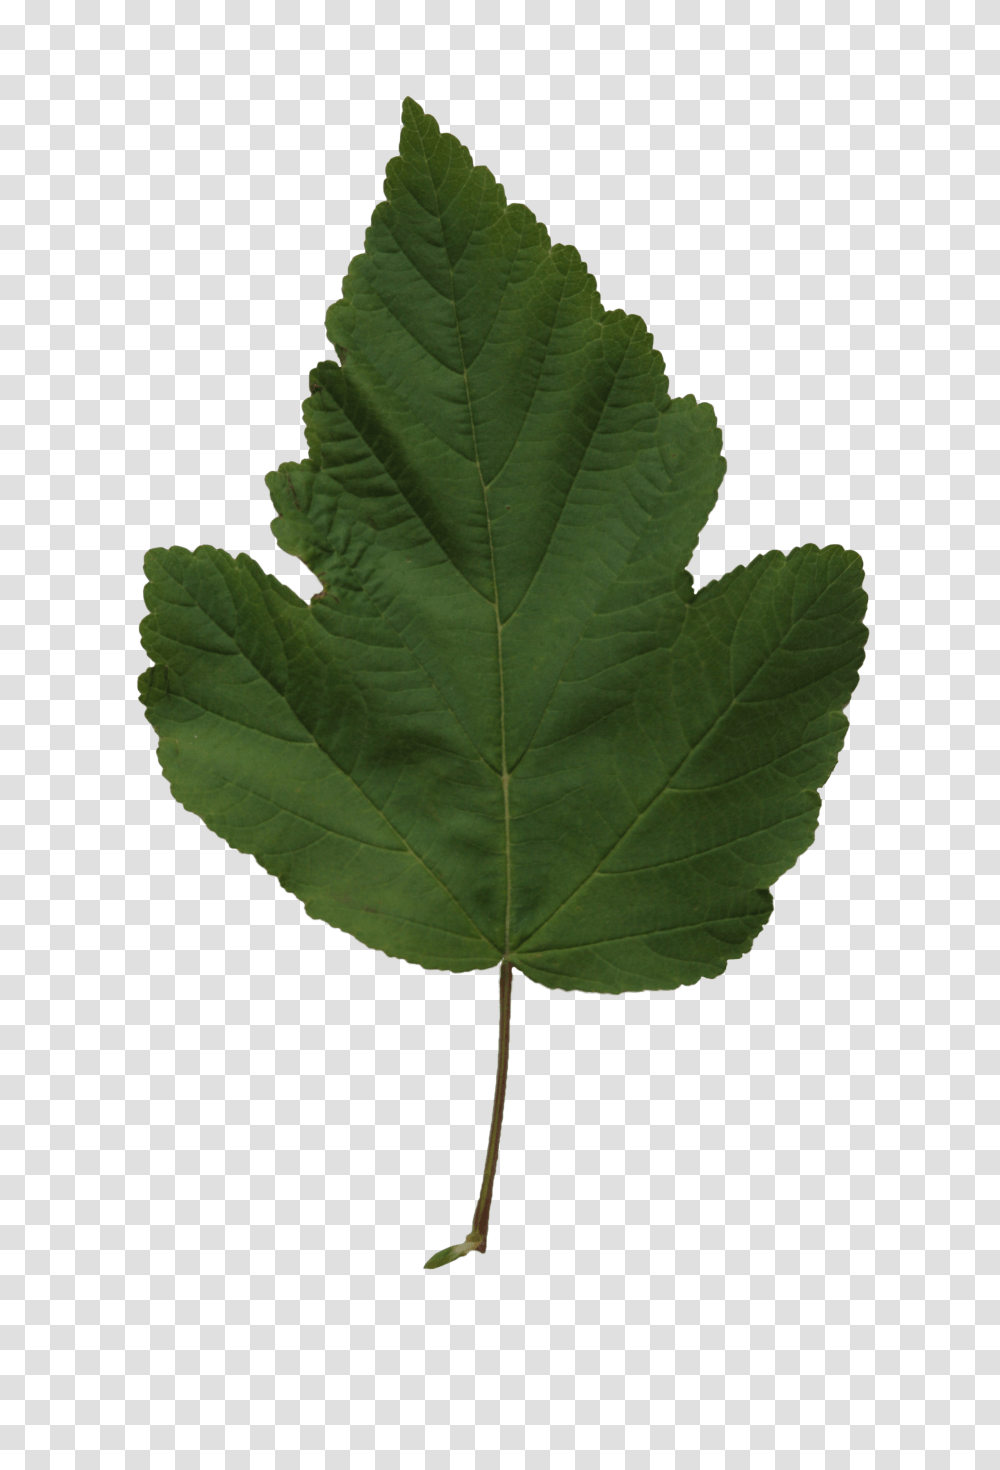 Poplar Leaf Texture Free Cut Out People Trees And Leaves, Plant, Maple Leaf, Pineapple, Fruit Transparent Png